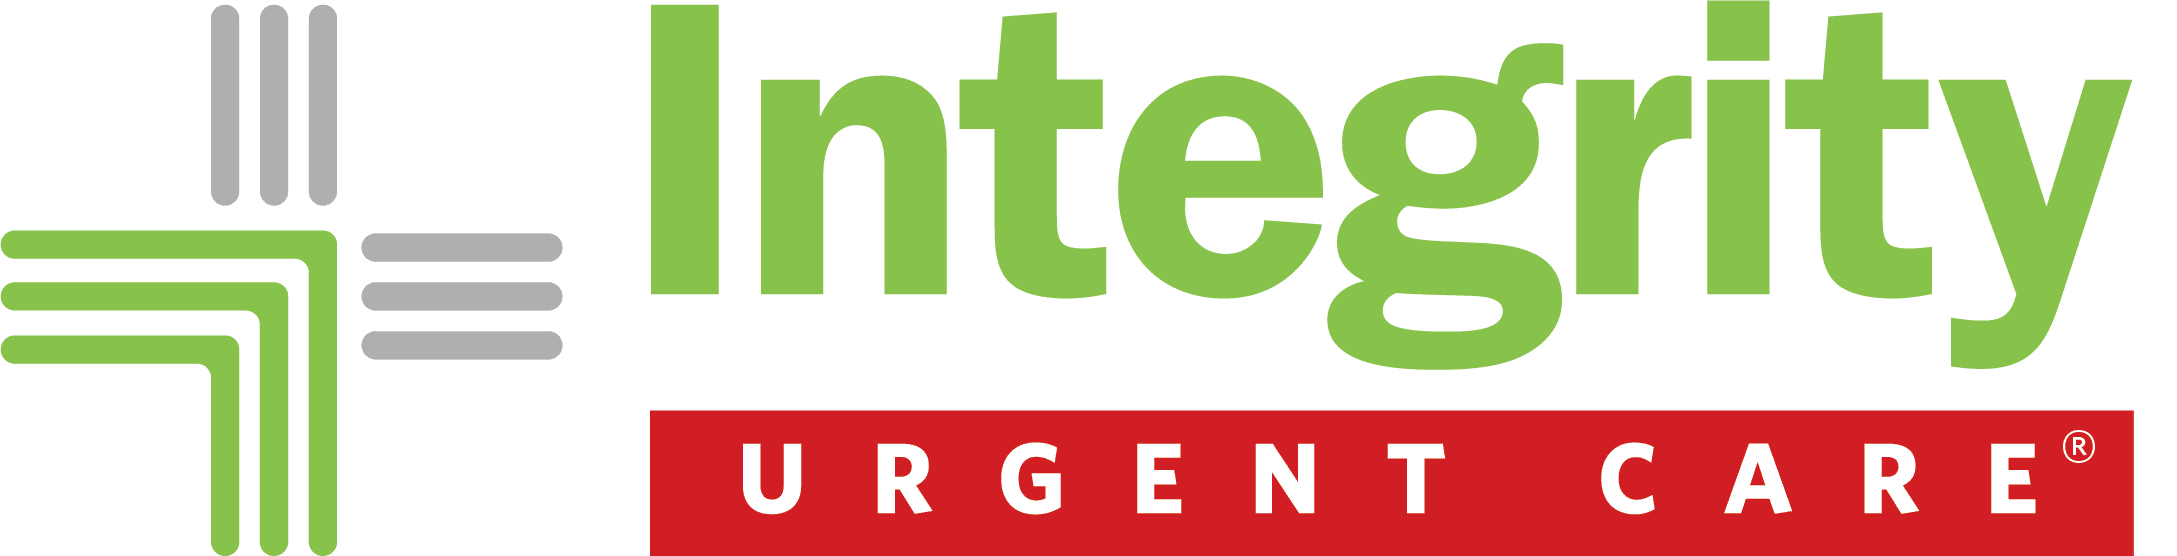 Integrity Urgent Care green and red logo.